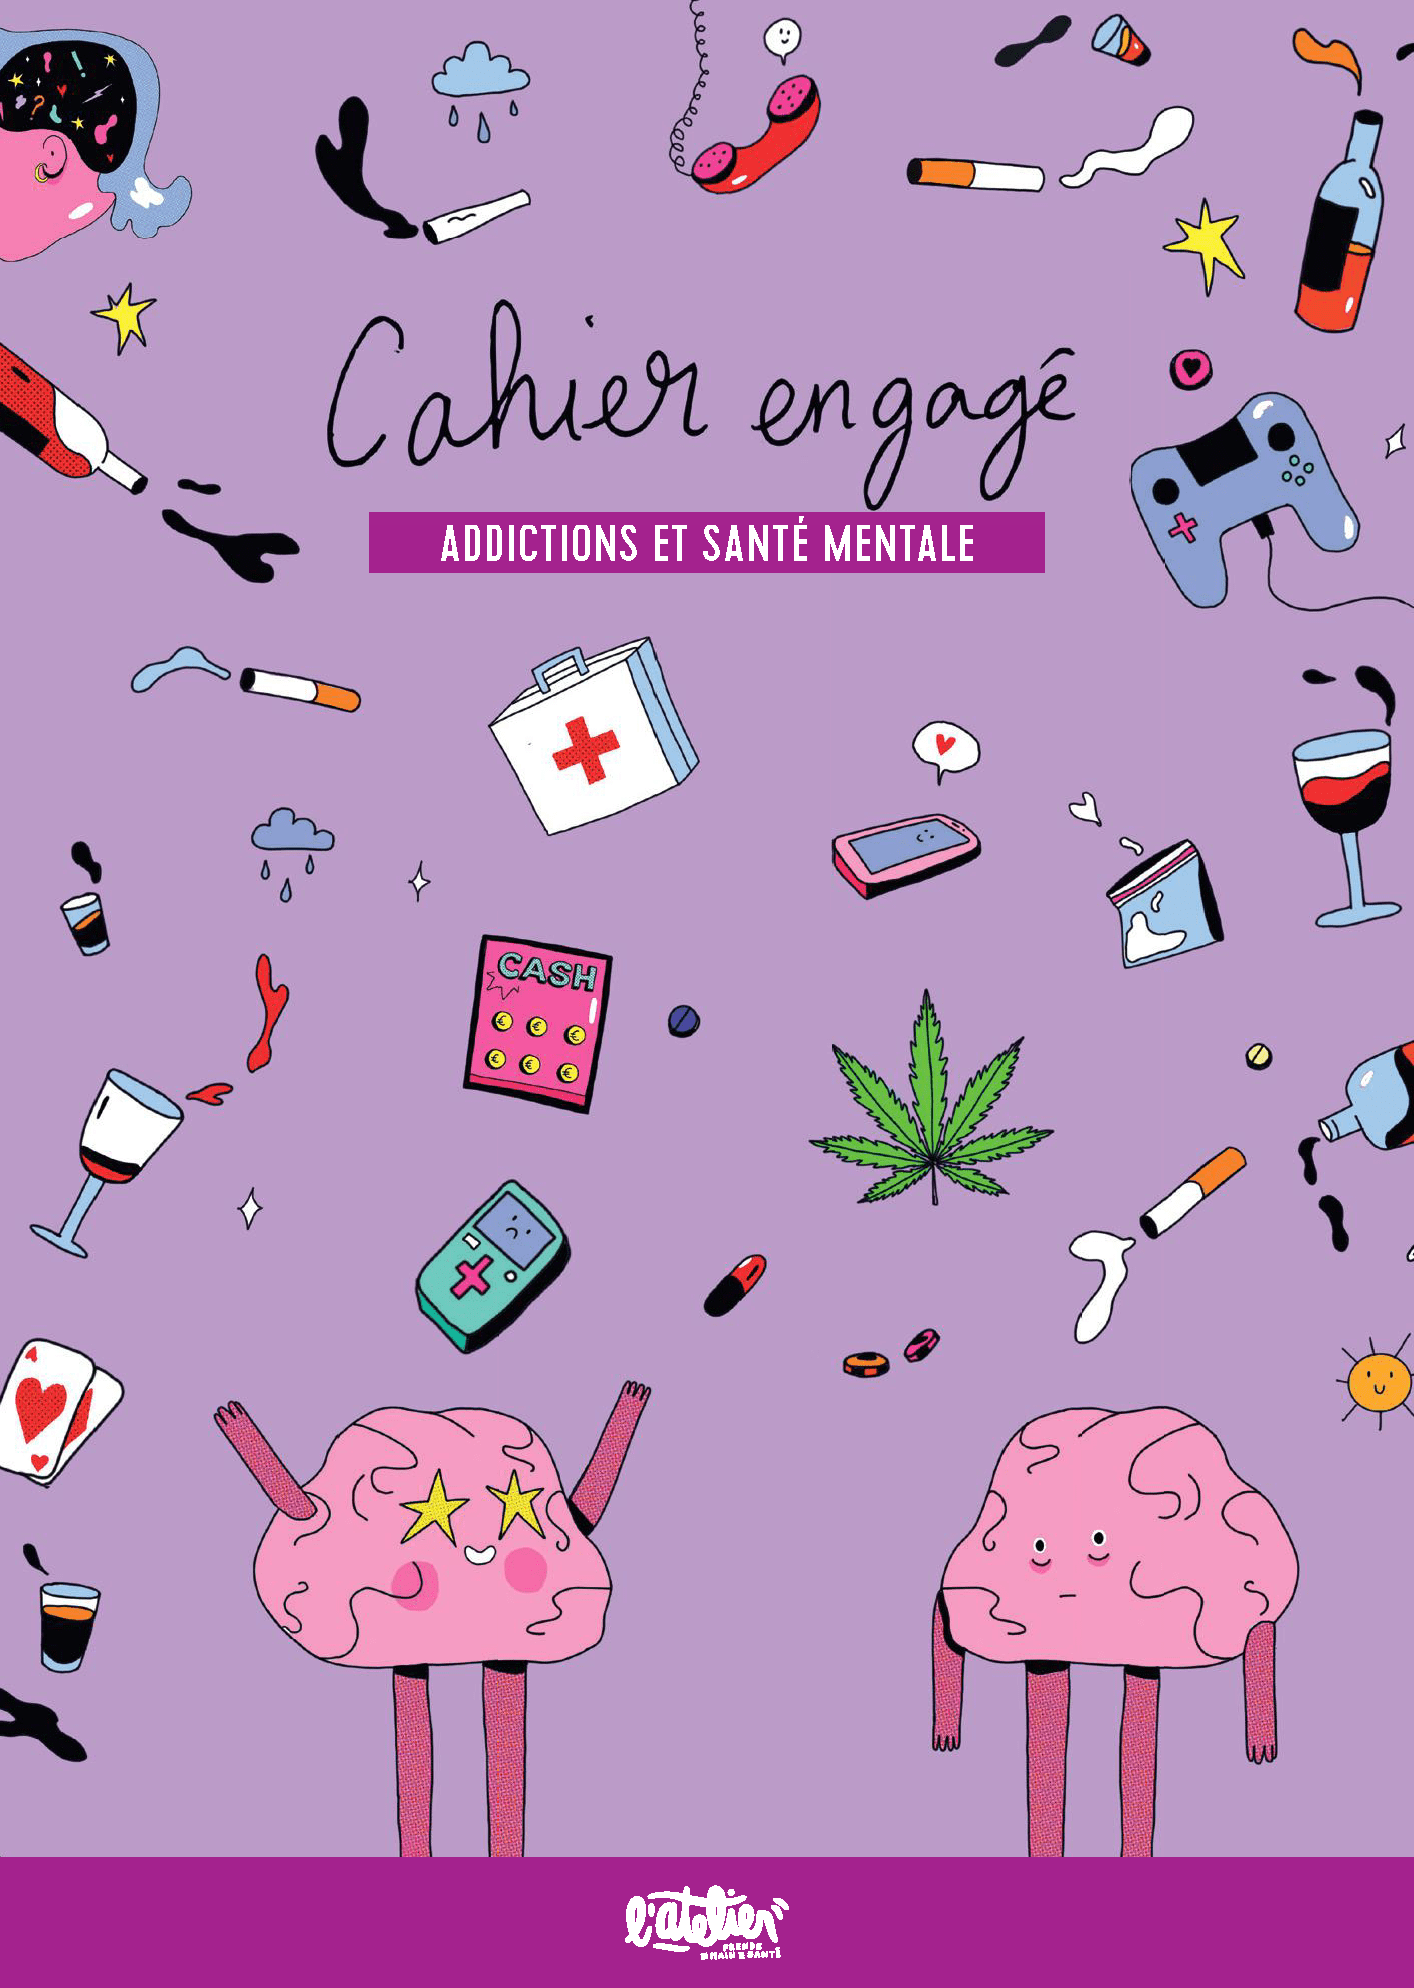 crips cahier engage addictions couverture